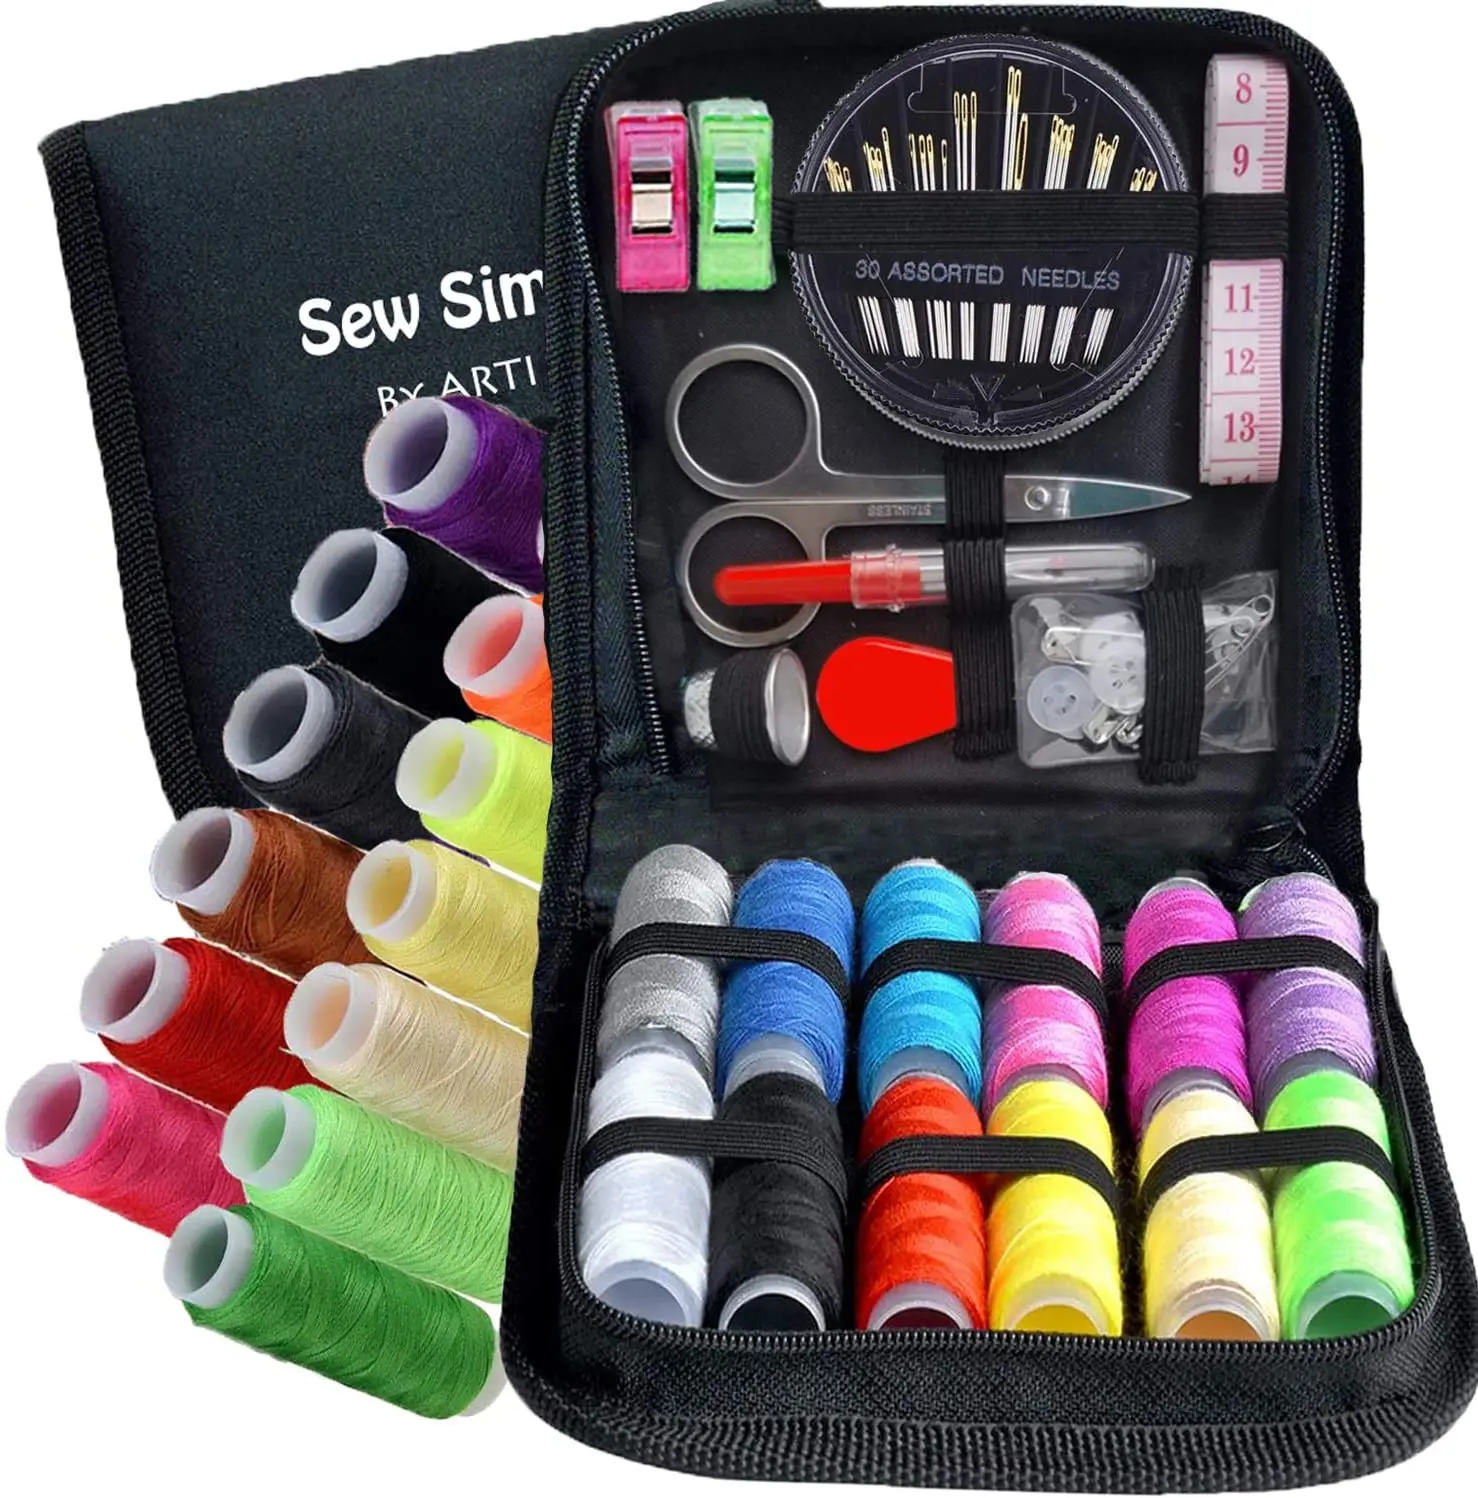 Notionsland Sk05 Sewing Kit for Adults with Needles, Thread, Scissors, Buttons, and More - Portable and Basic, Size: Complete Sewing Kit, Black